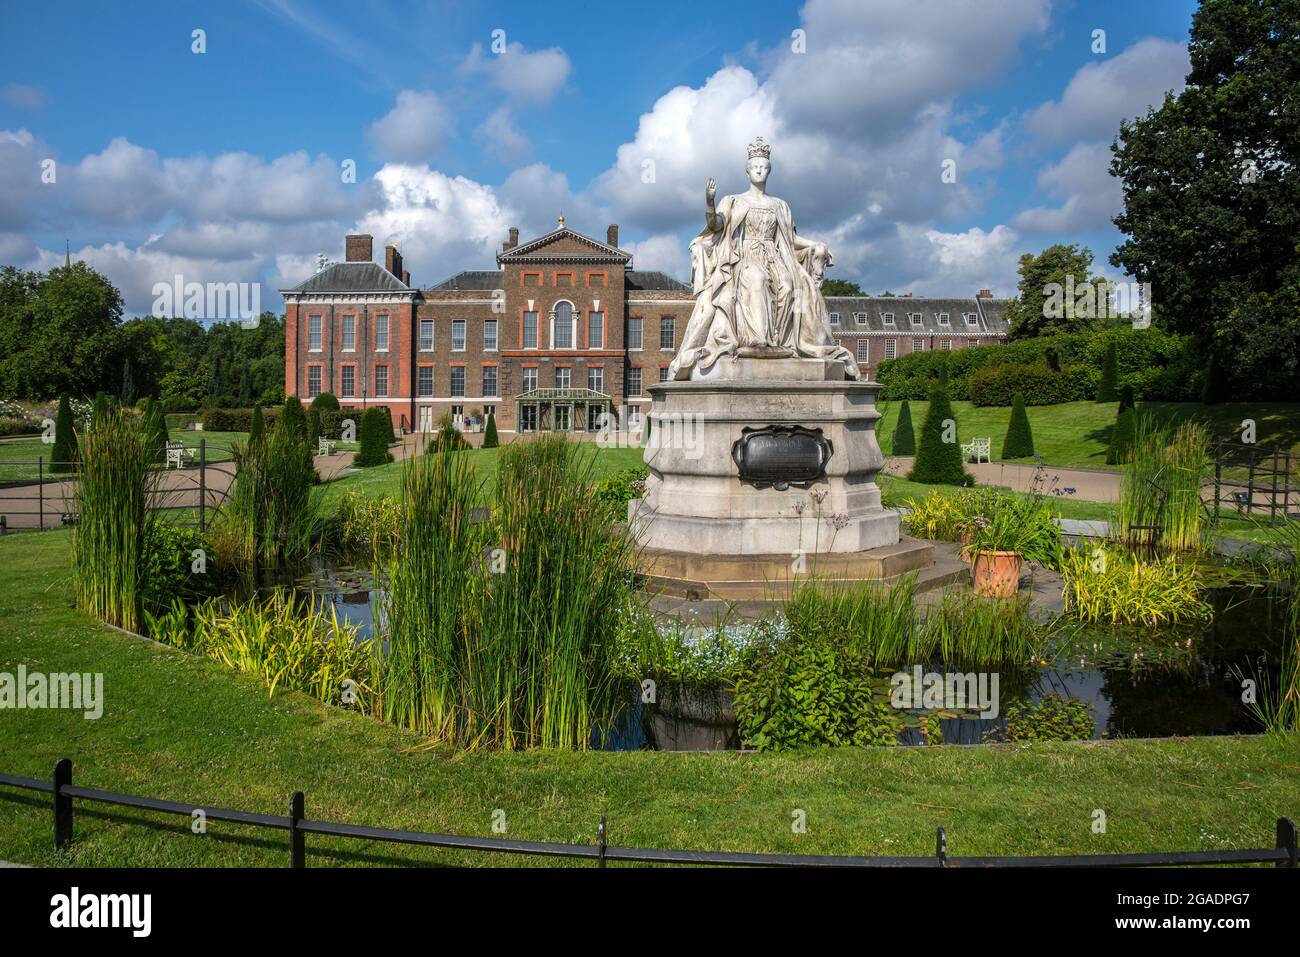 Queen Victoria Statue in front of Kensington Palace, London Stock Photo